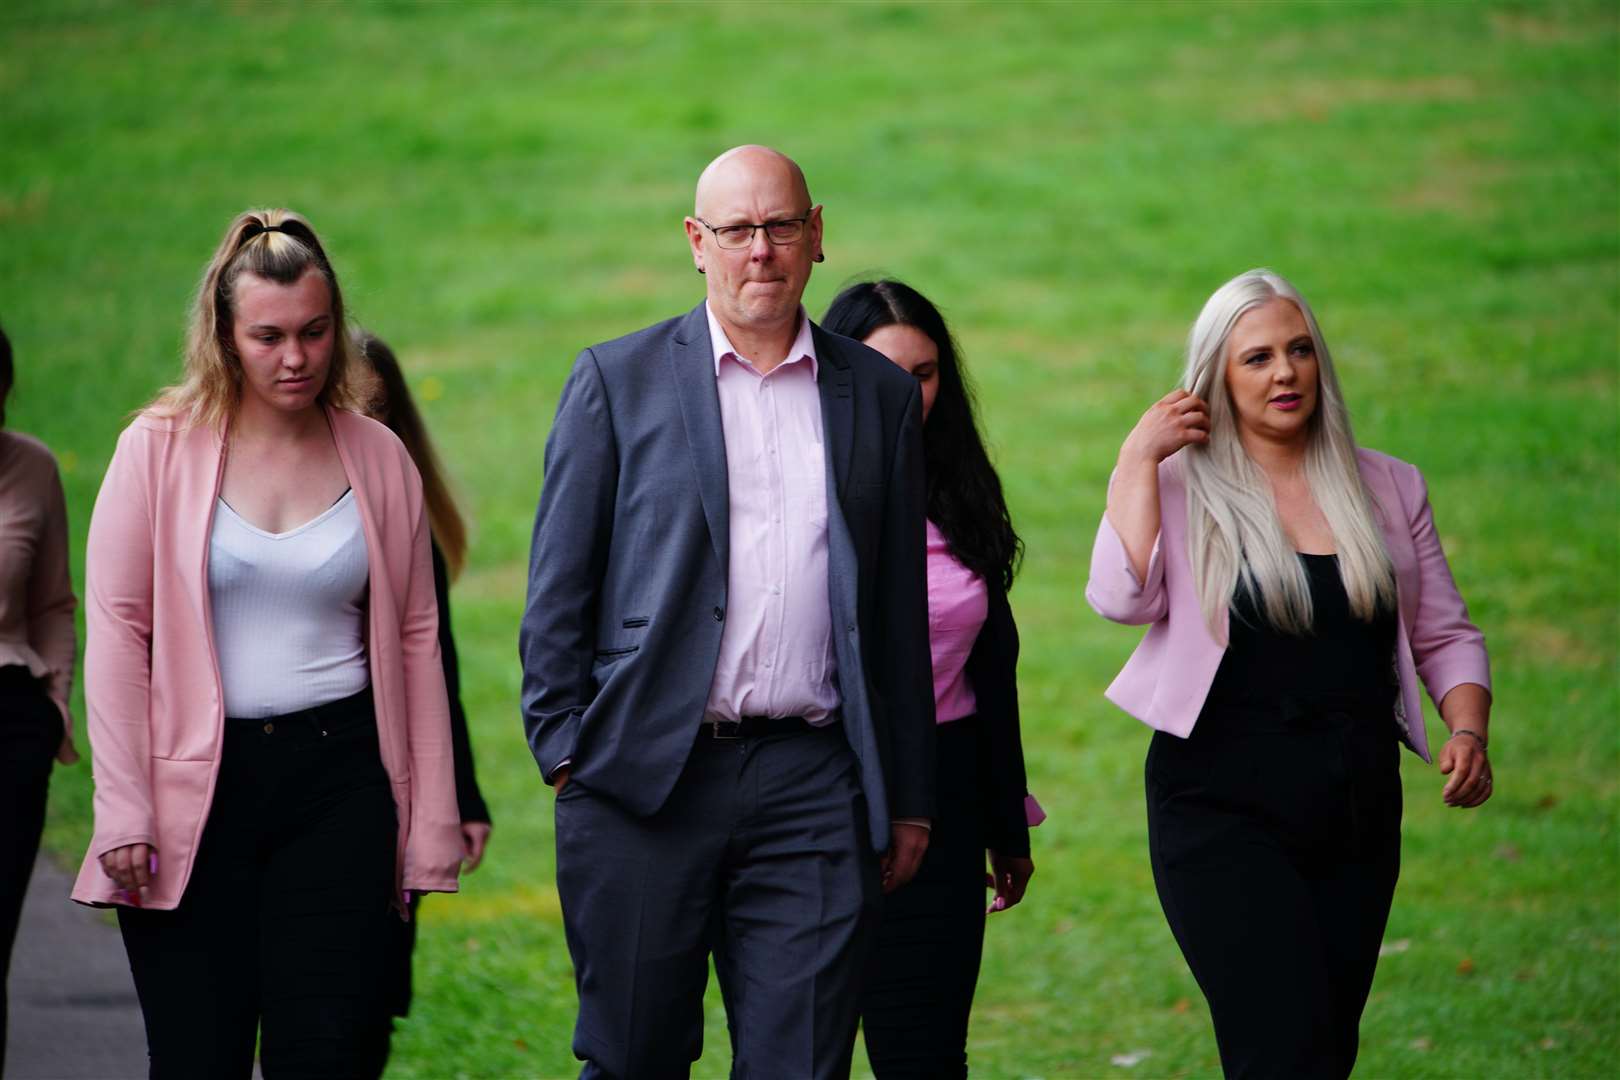 Celia Marsh’s husband Andy Marsh and members of her family arrive for the inquest at Avon and Somerset Coroner’s Court in Bristol (Ben Birchall/PA)